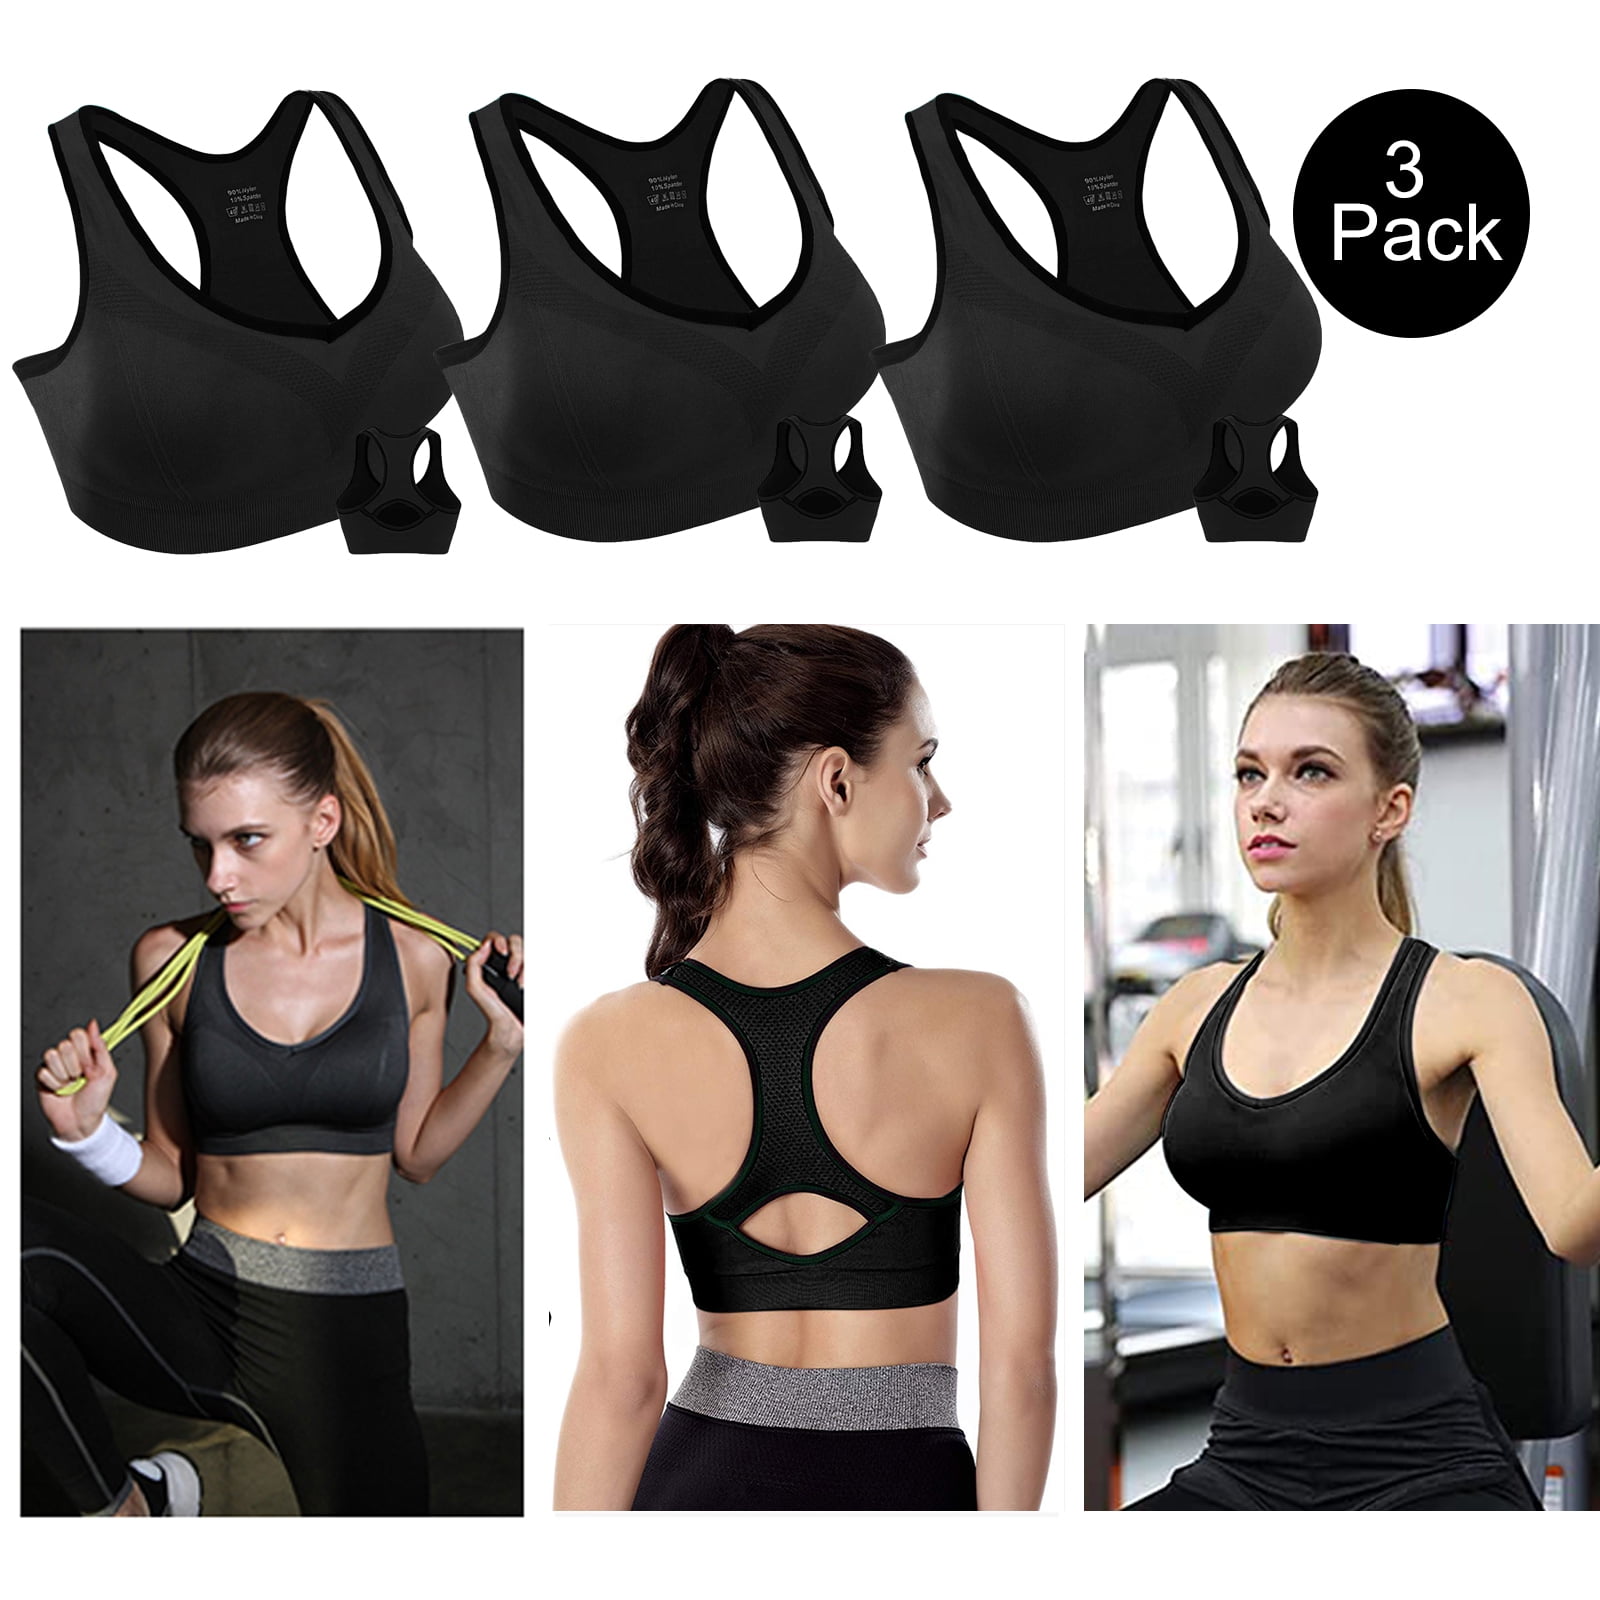 Workout Sports Bra with 3 Pack for Women, XXL Sized Padded